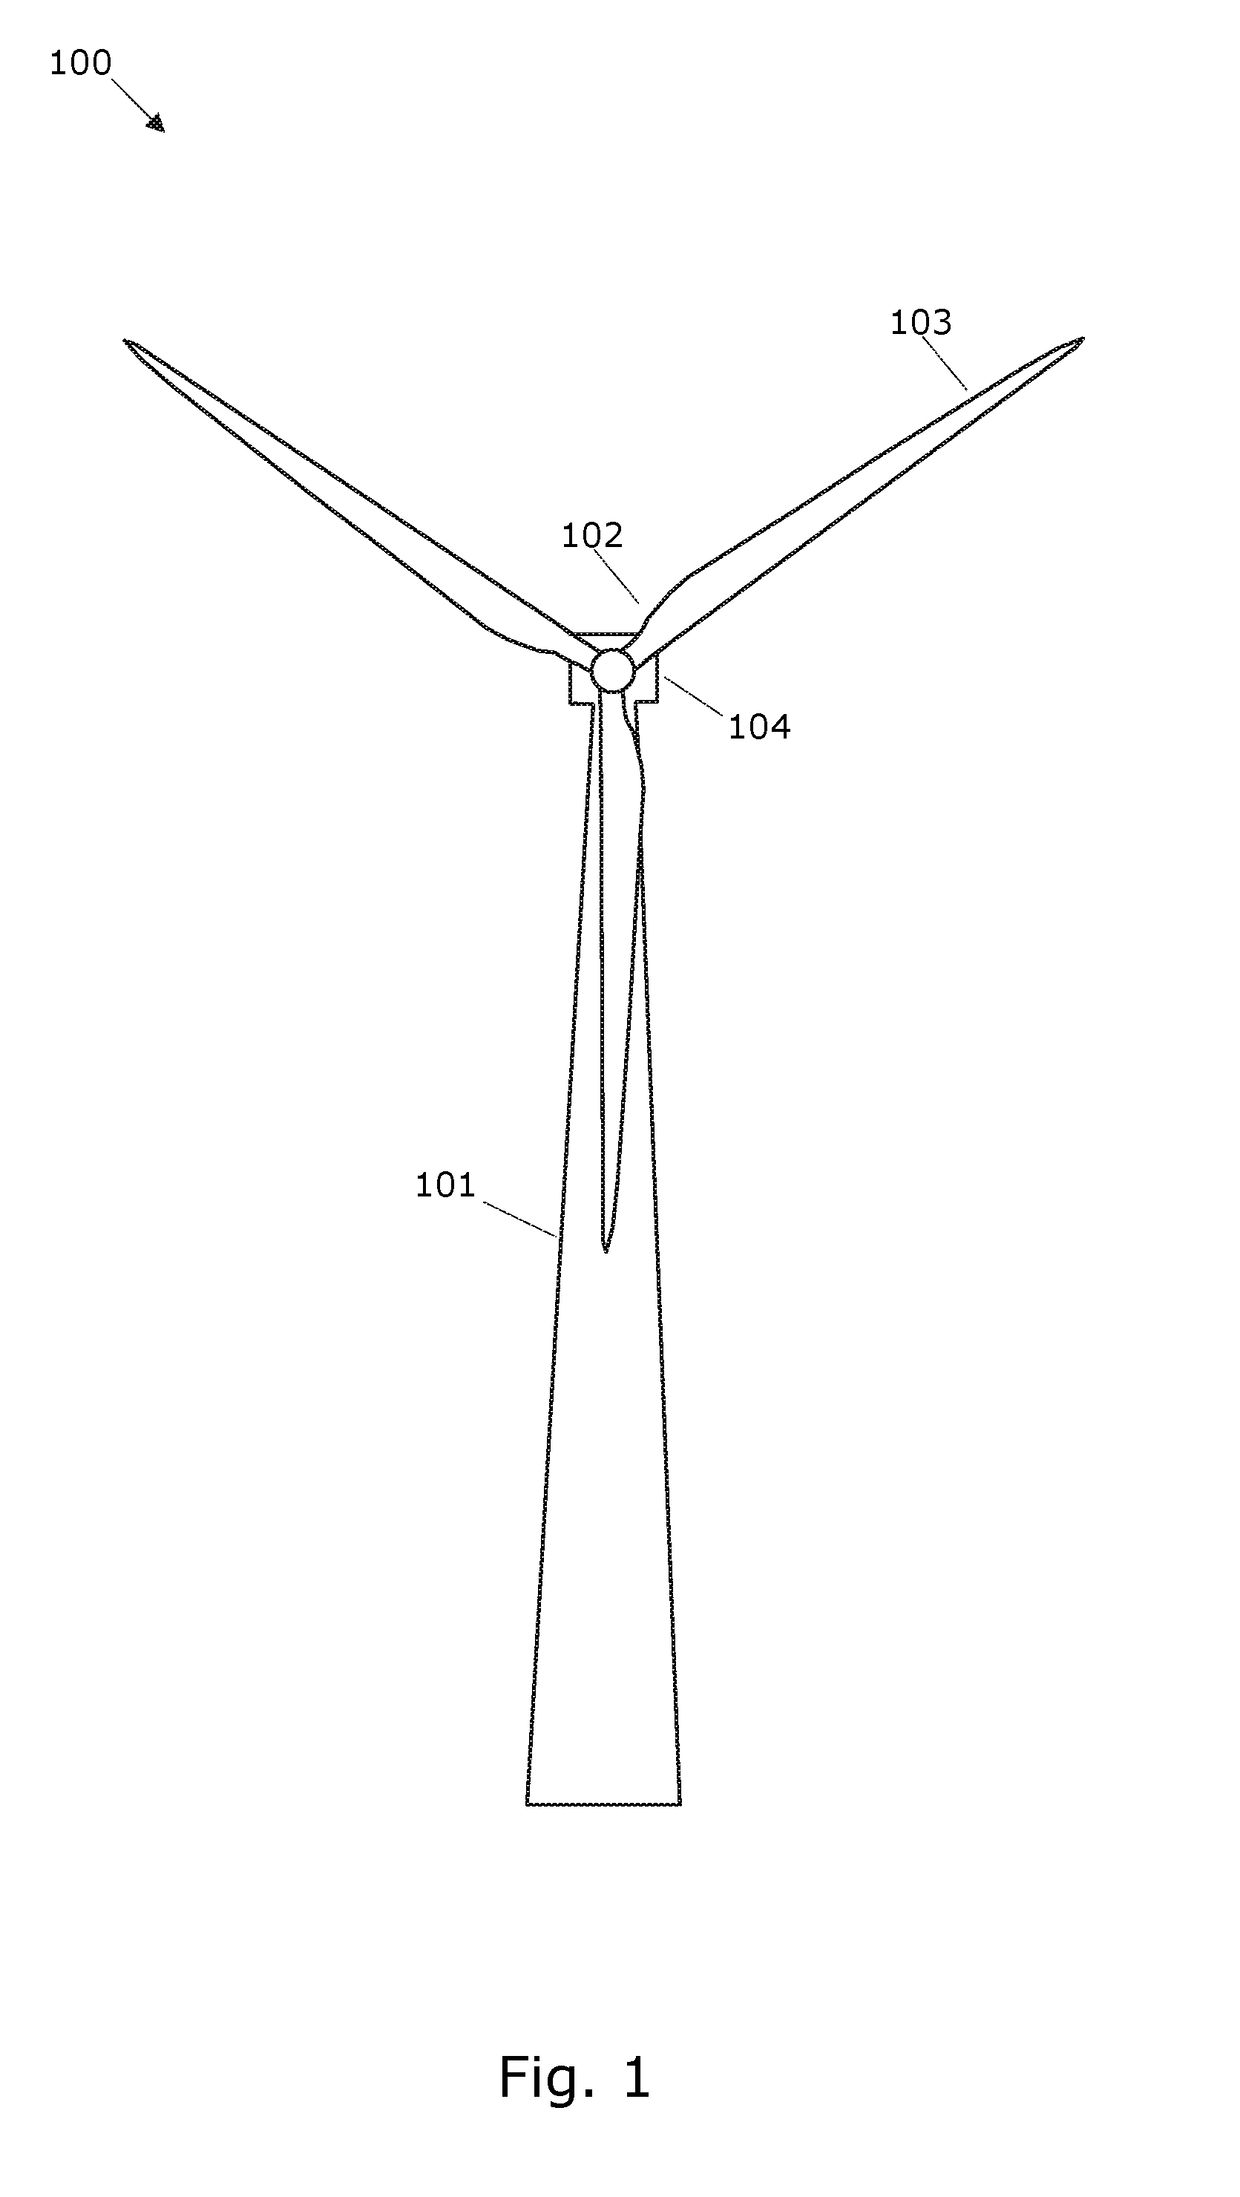 Power ramp rate limiter for wind turbines